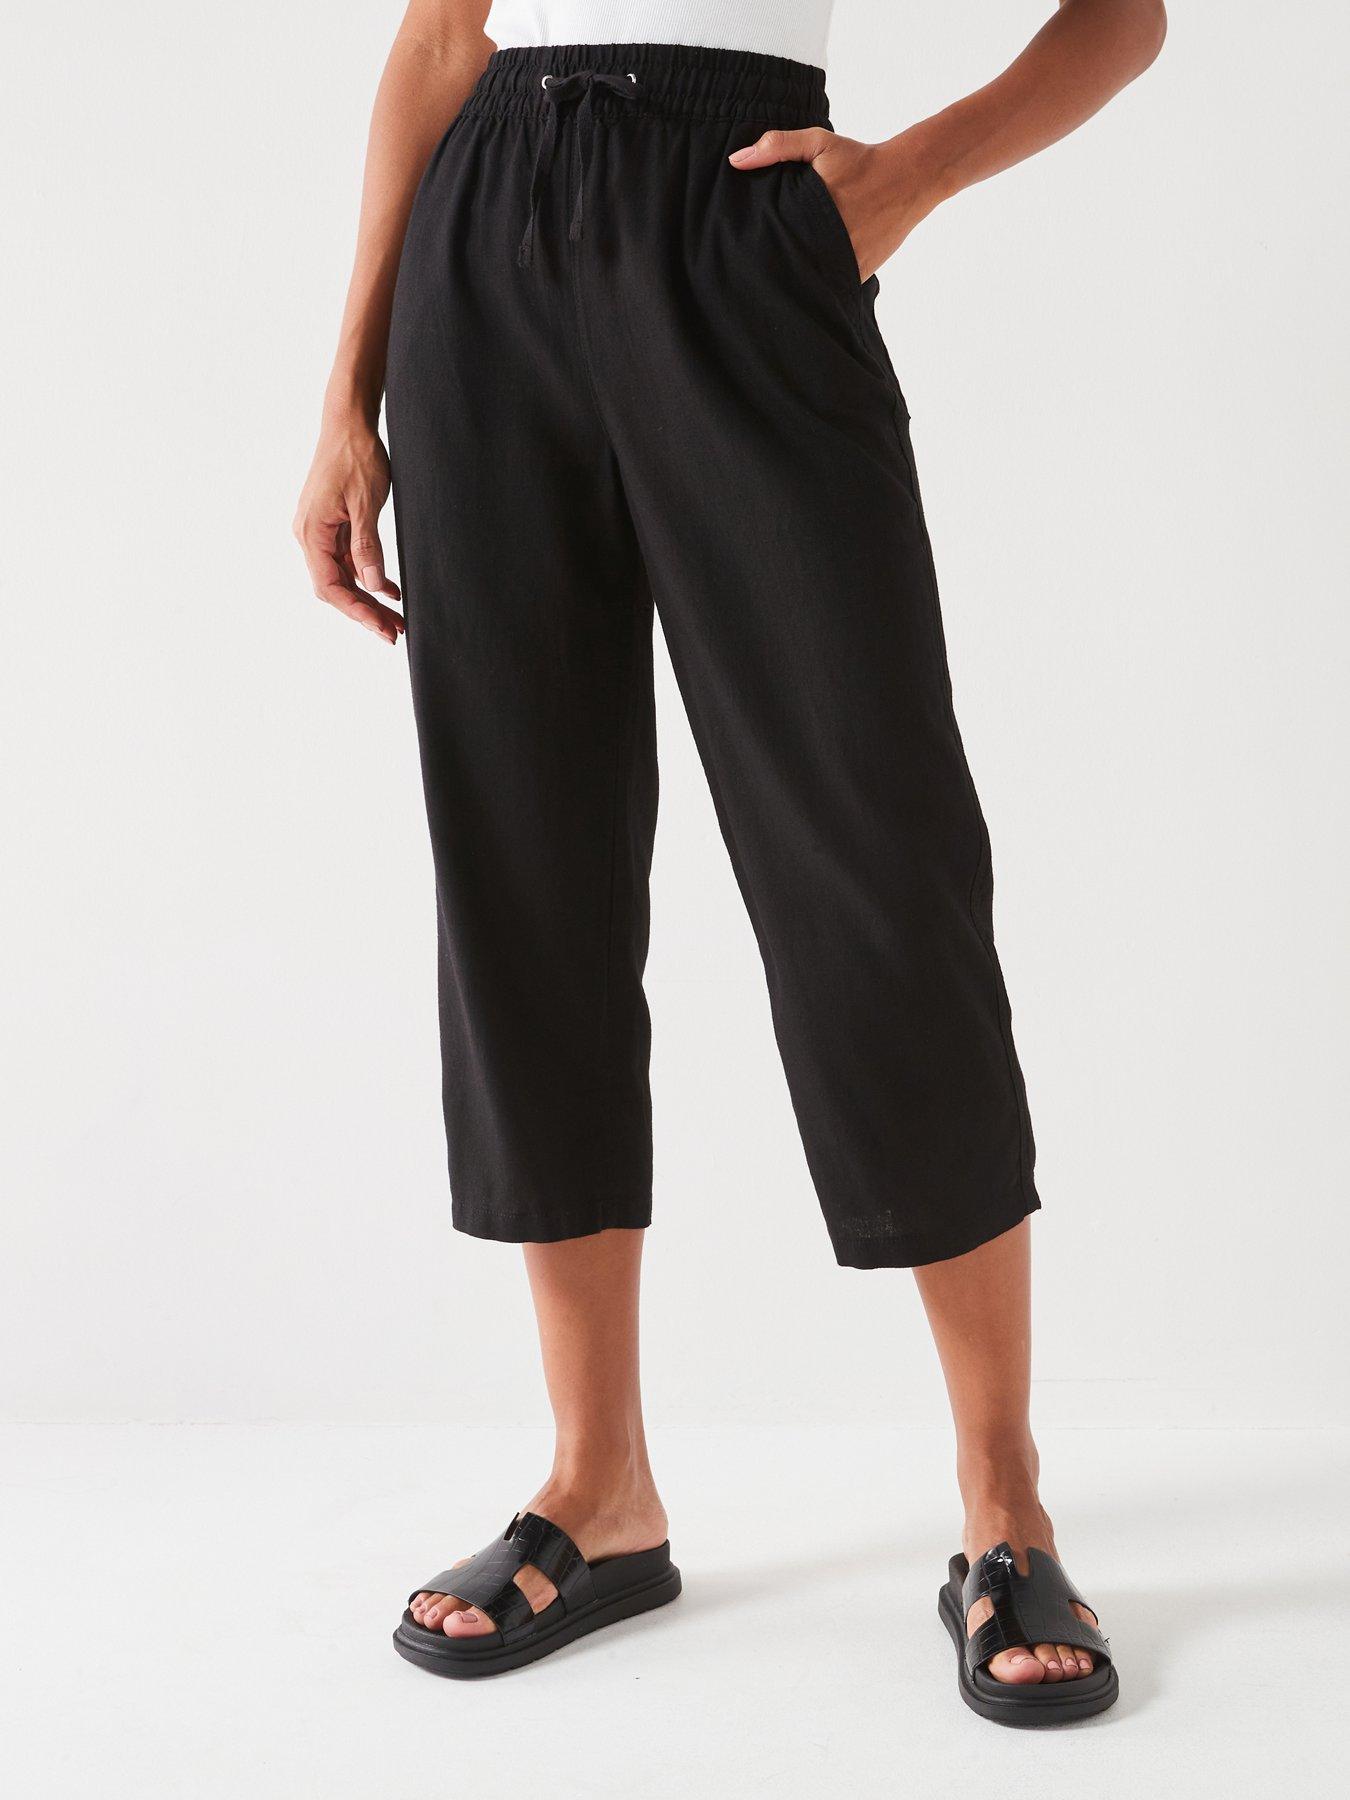 Shop Women's Cropped Trousers, Cropped Pants